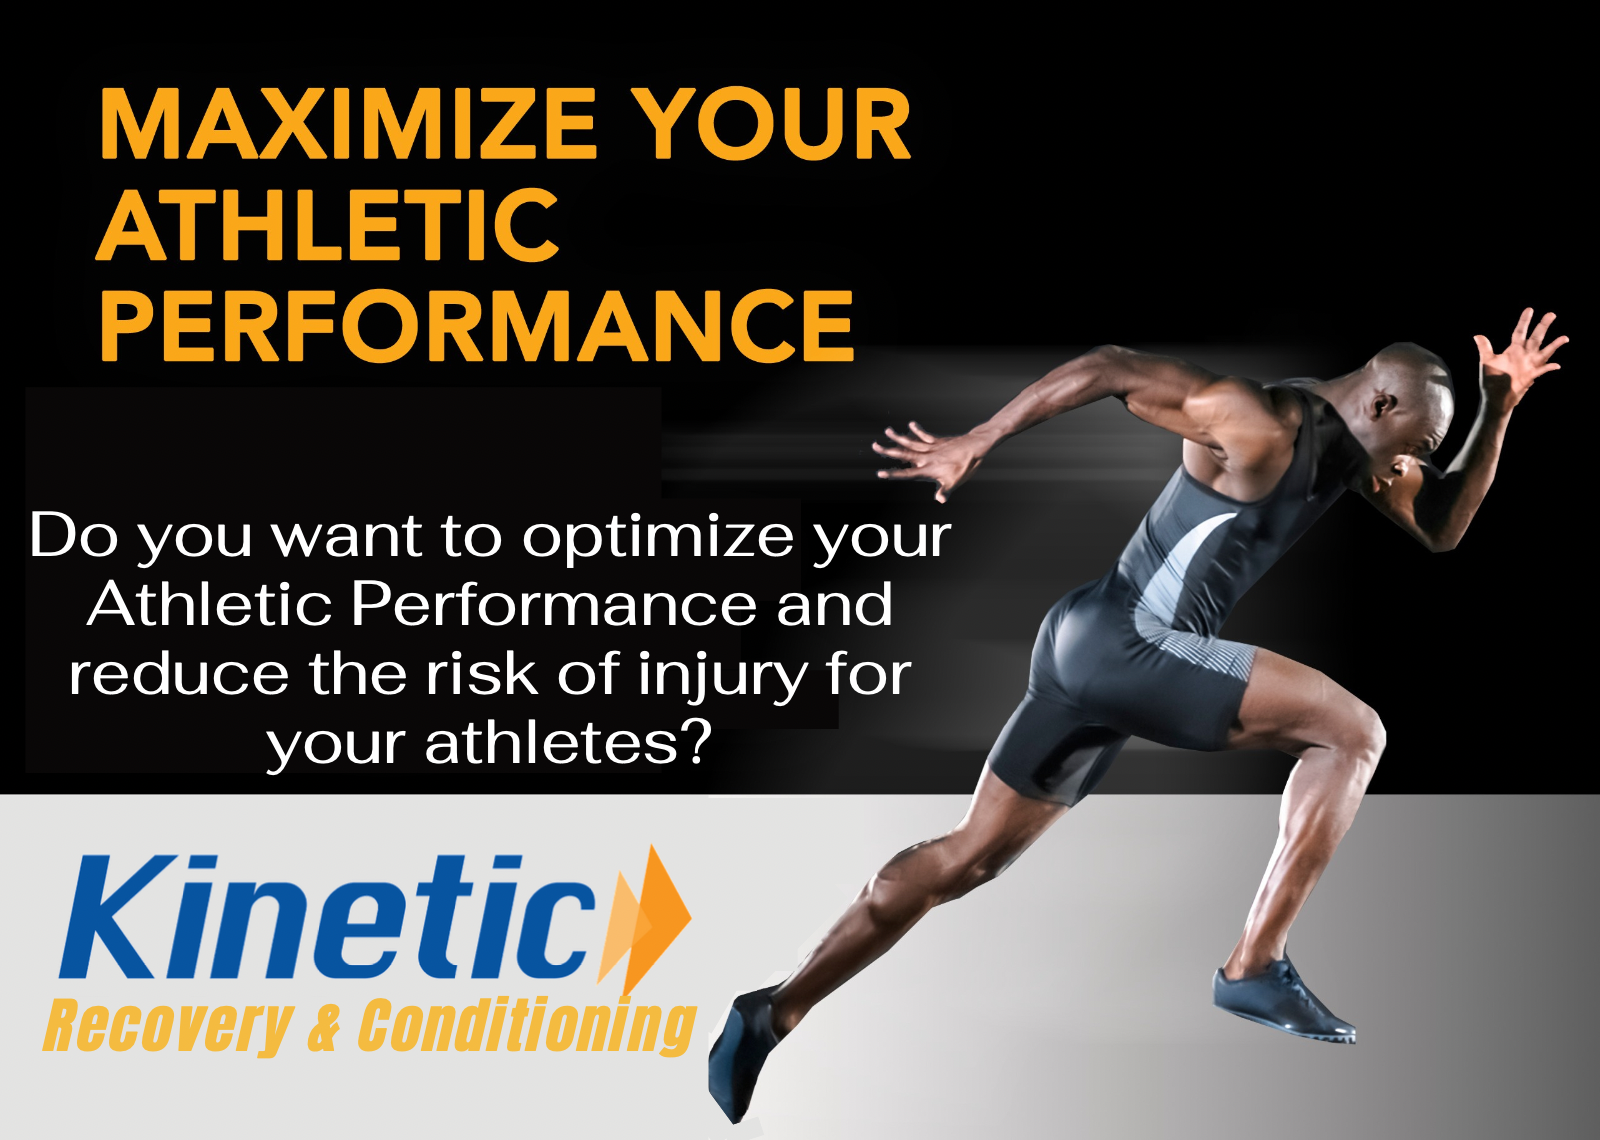 Maximize Your Athletic Performance